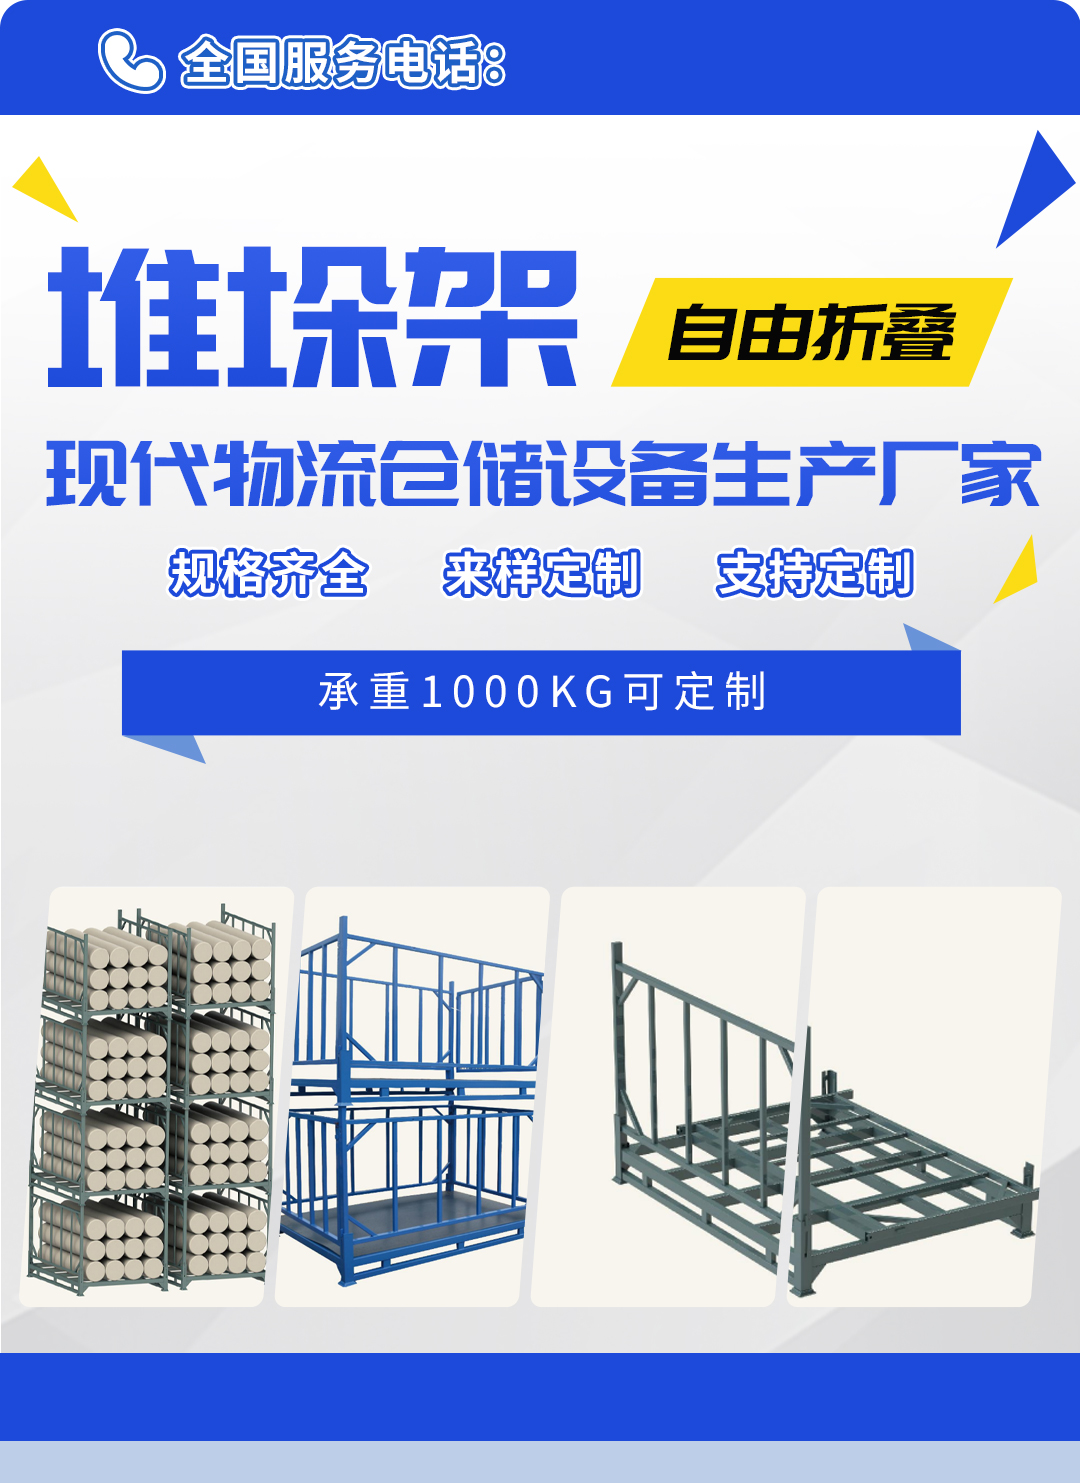 Tire storage rack, 2 layers, 3 layers, 4 layers, foldable stacking rack, warehouse rack, multifunctional and flexible rack